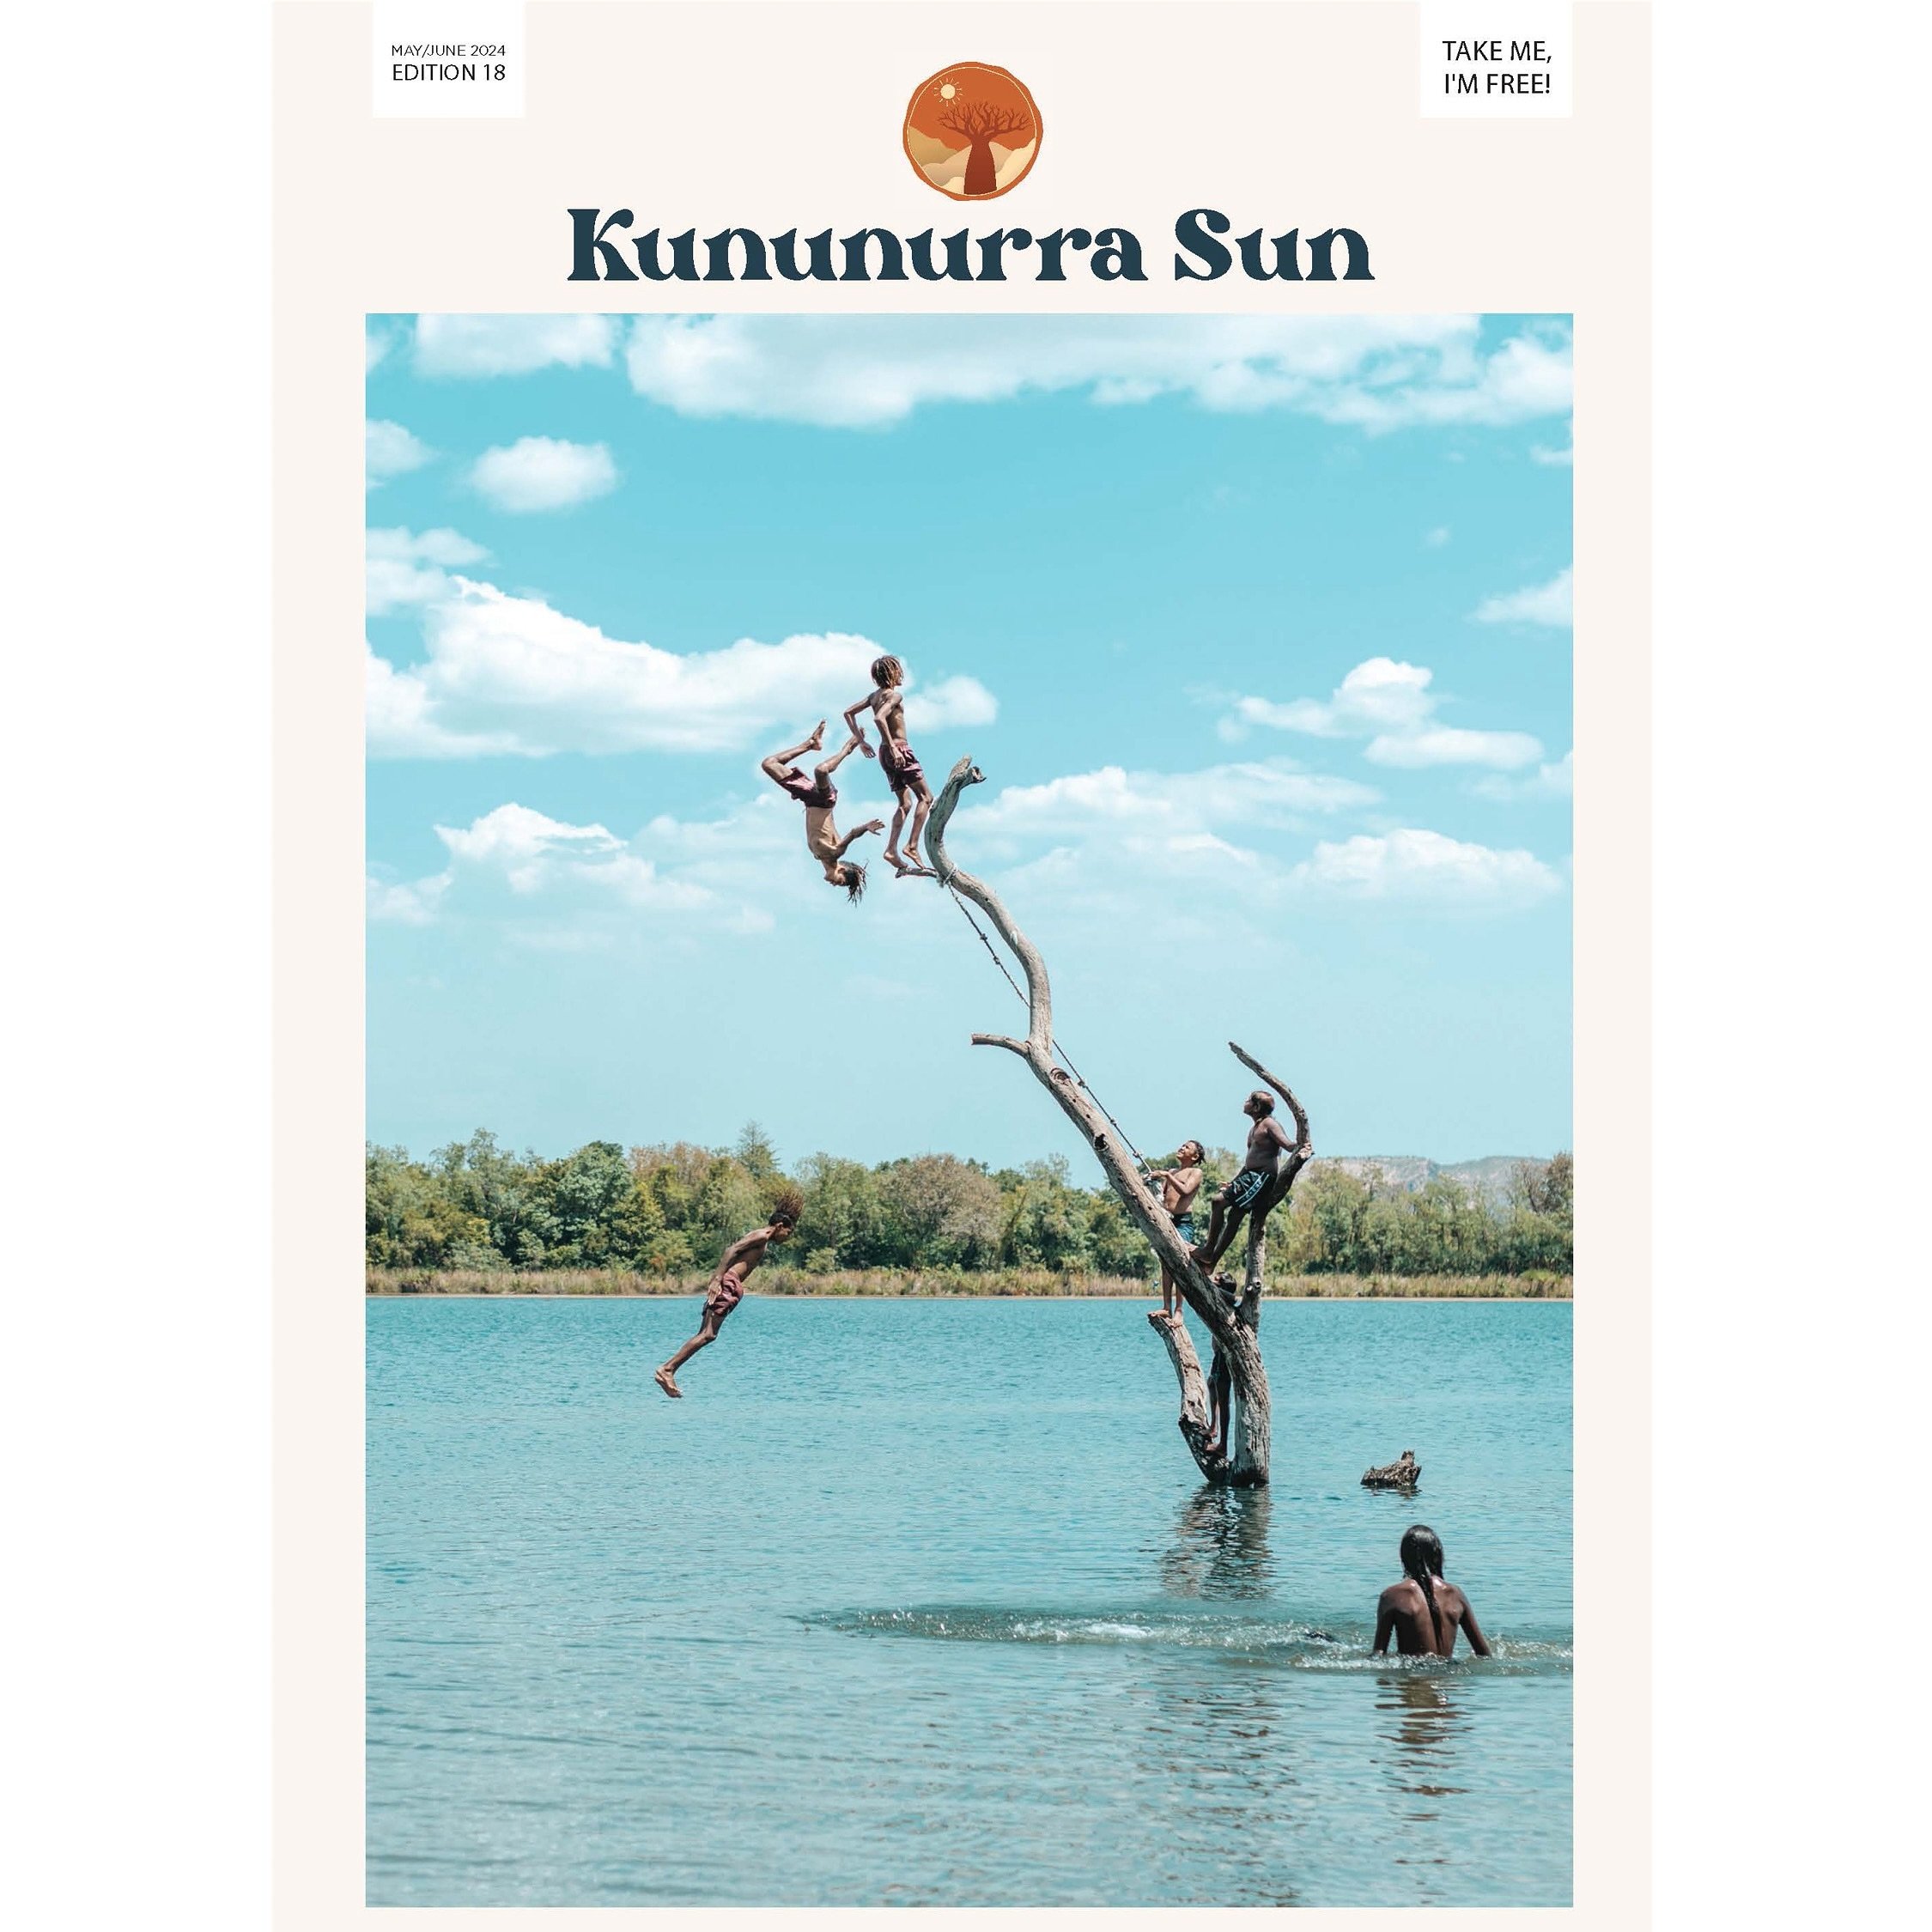 Dry season is doin&rsquo; its thaaaang and so are we! We&rsquo;ve got the latest May/June edition at your favourite spots around town now. 

This edition, we have packed it with everything from exploring Knx&rsquo;s fitness scene to uncovering some o